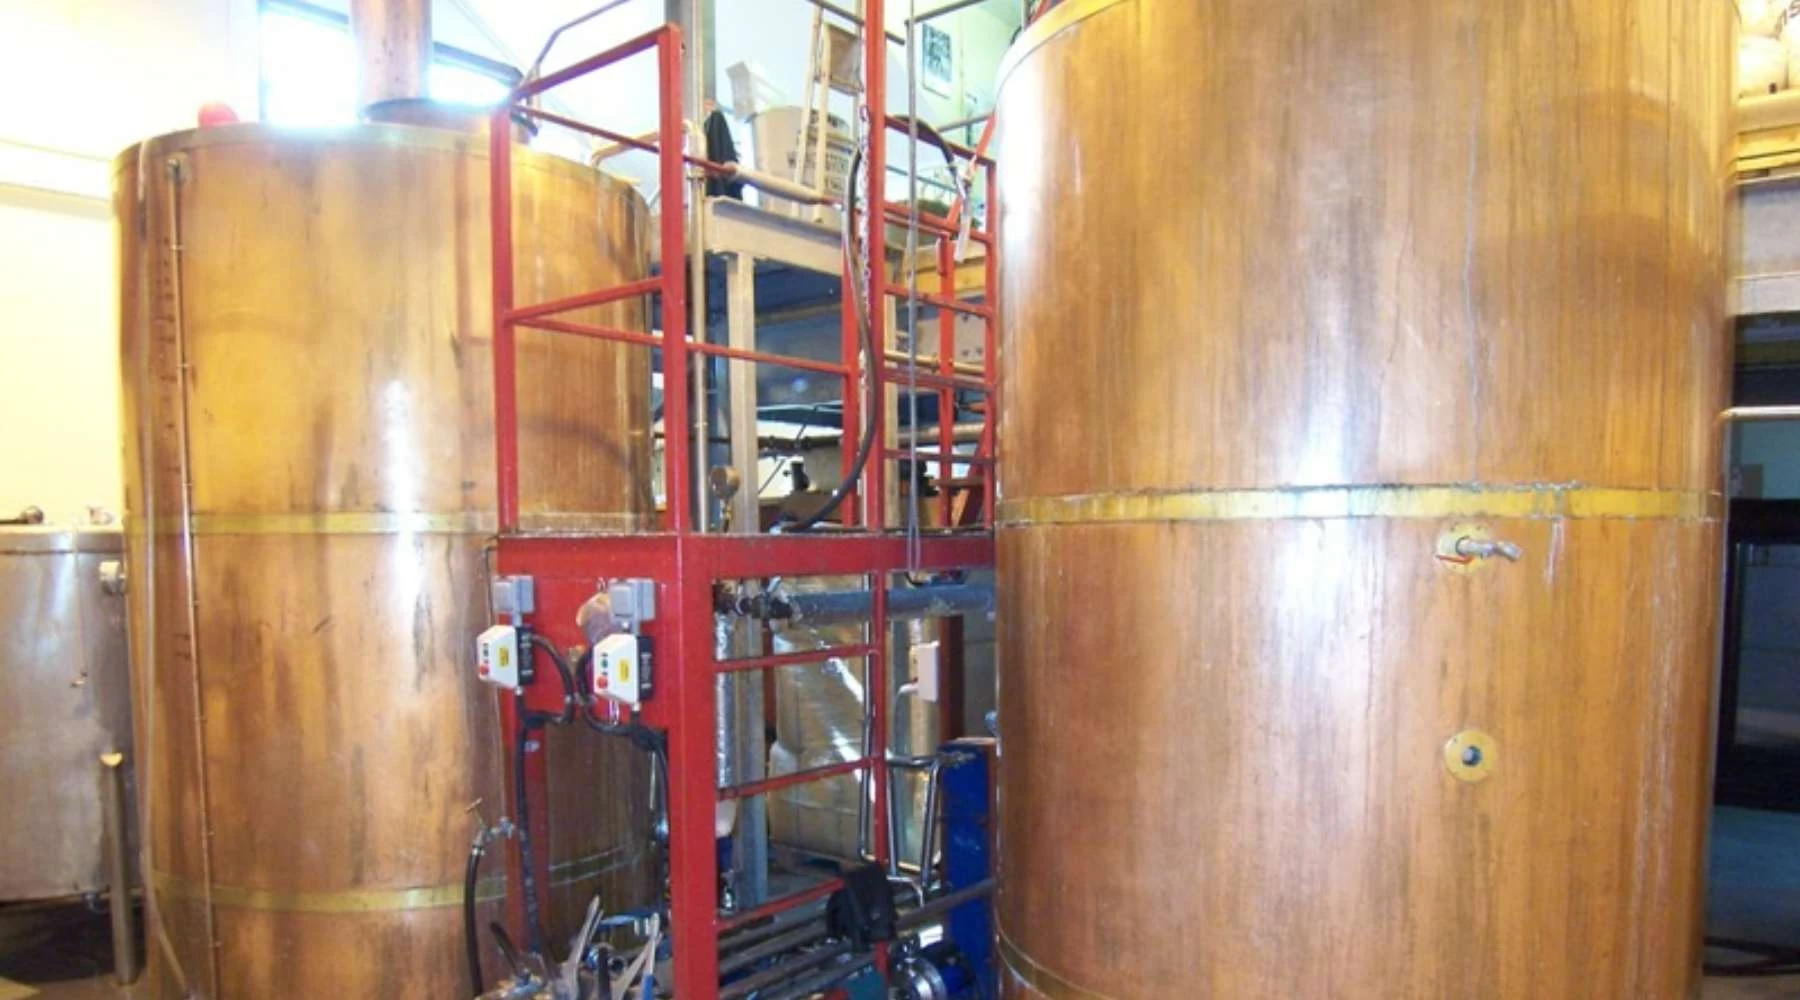 inside the brewery